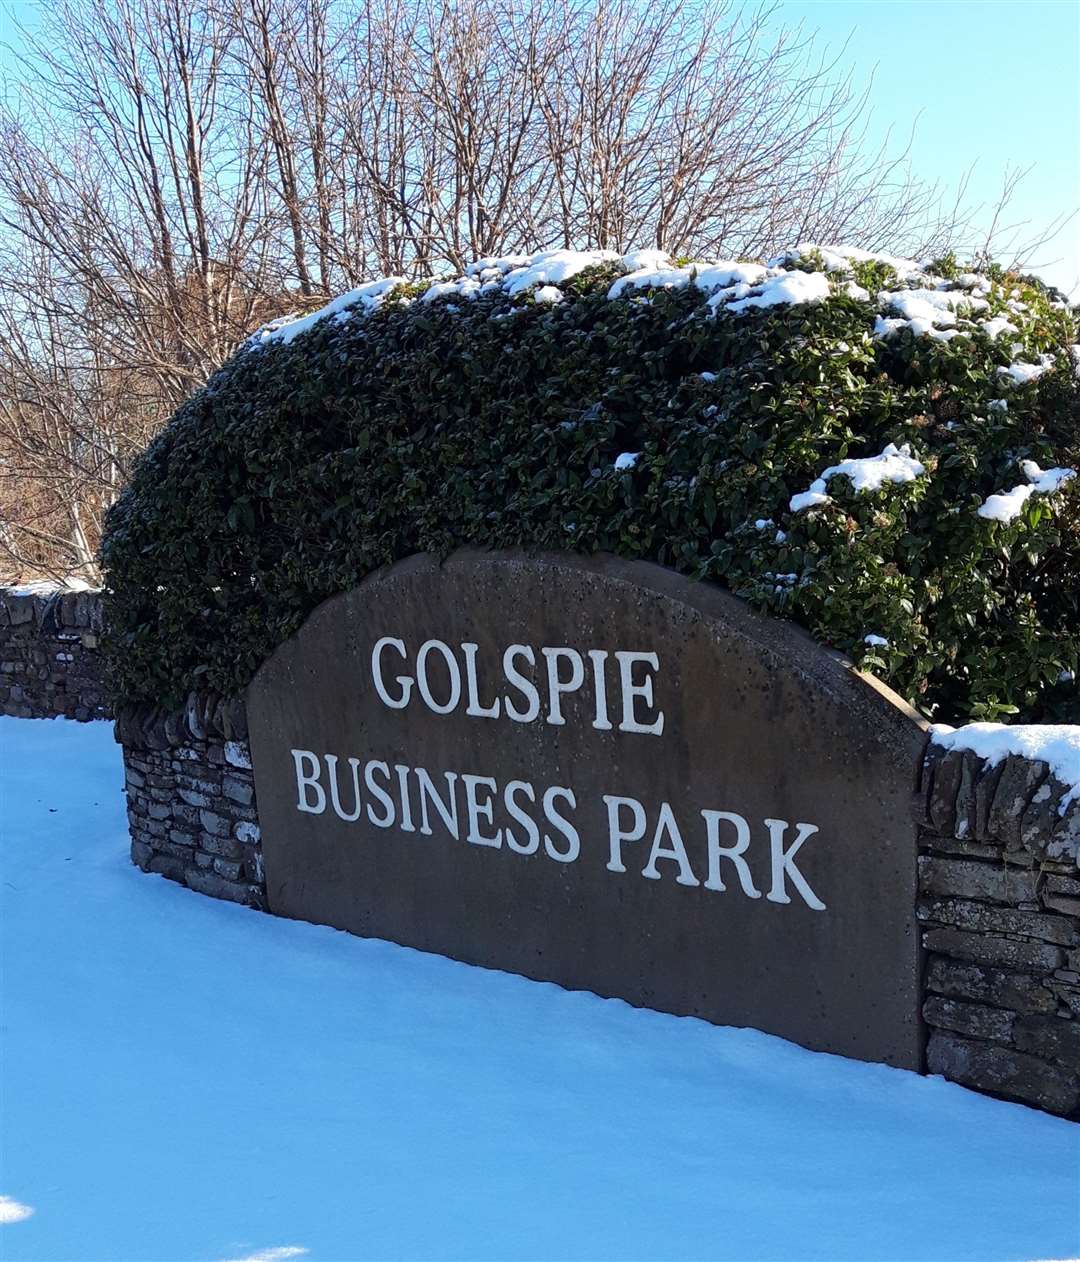 New developments are planned for Golspie Business Park.